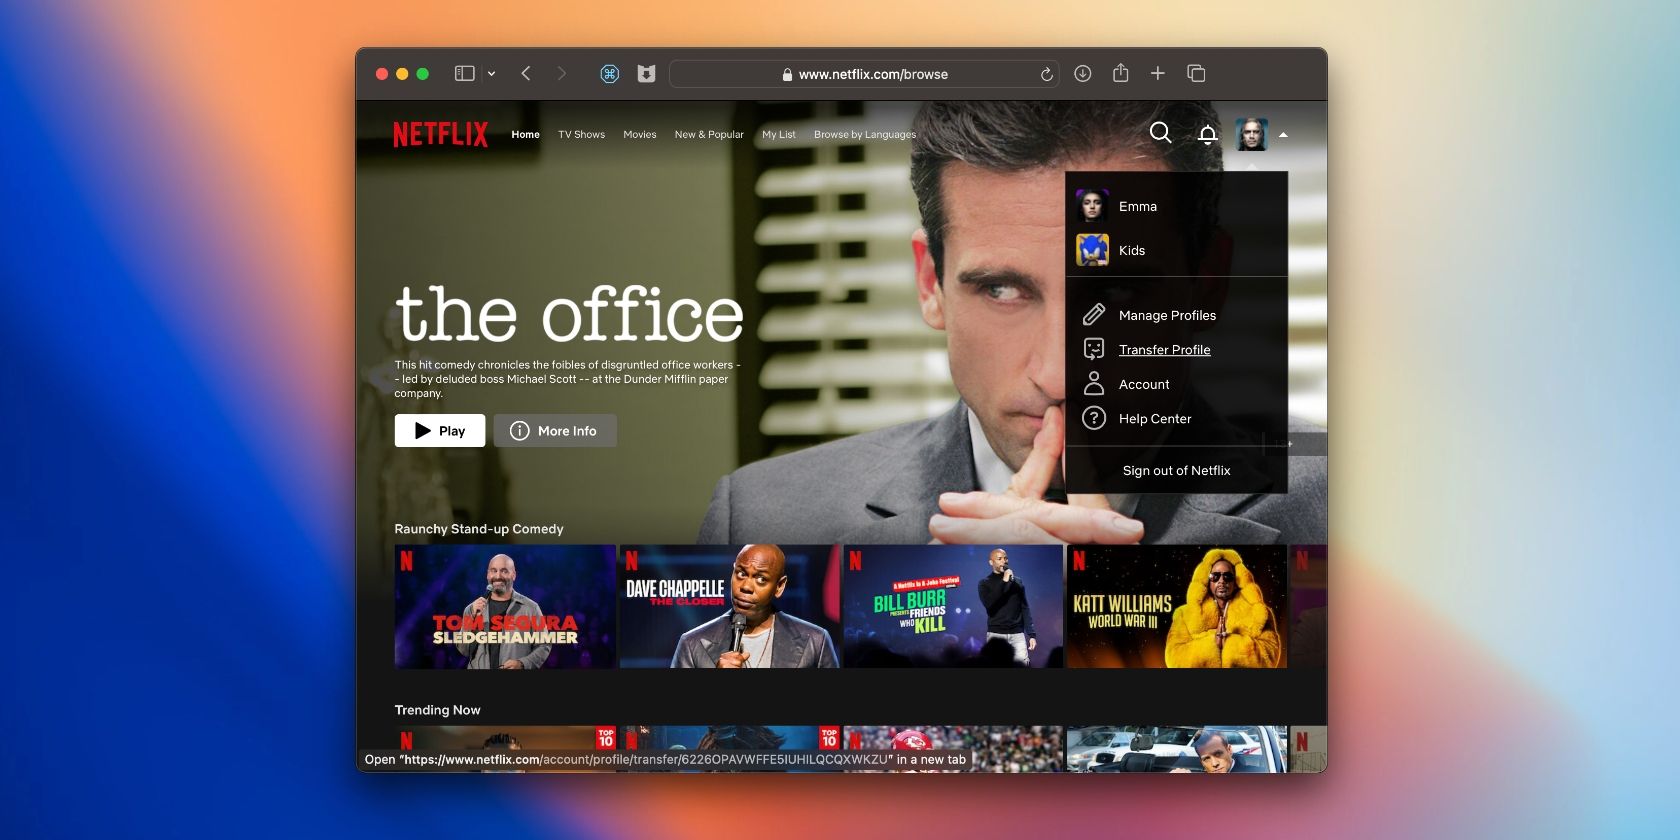 The Transfer Profile option in the Netflix menu on the web